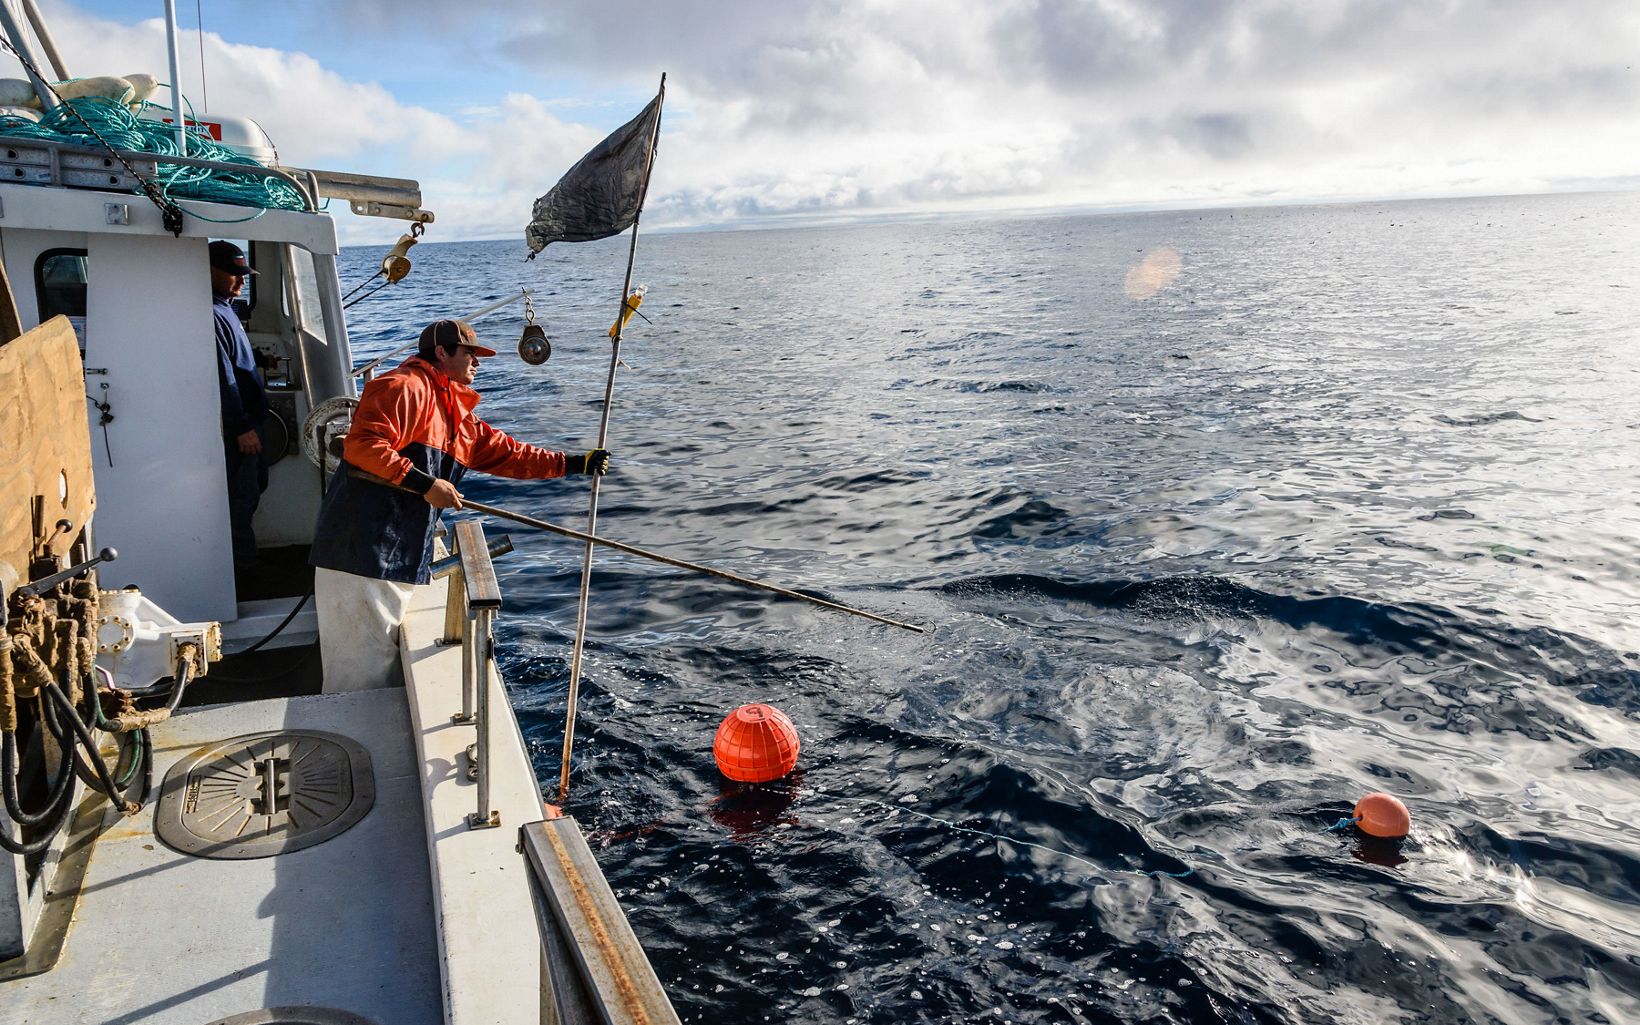 Fisherman holding a flag and stick, leaning over the side of a boat with orange buoys floating the water.